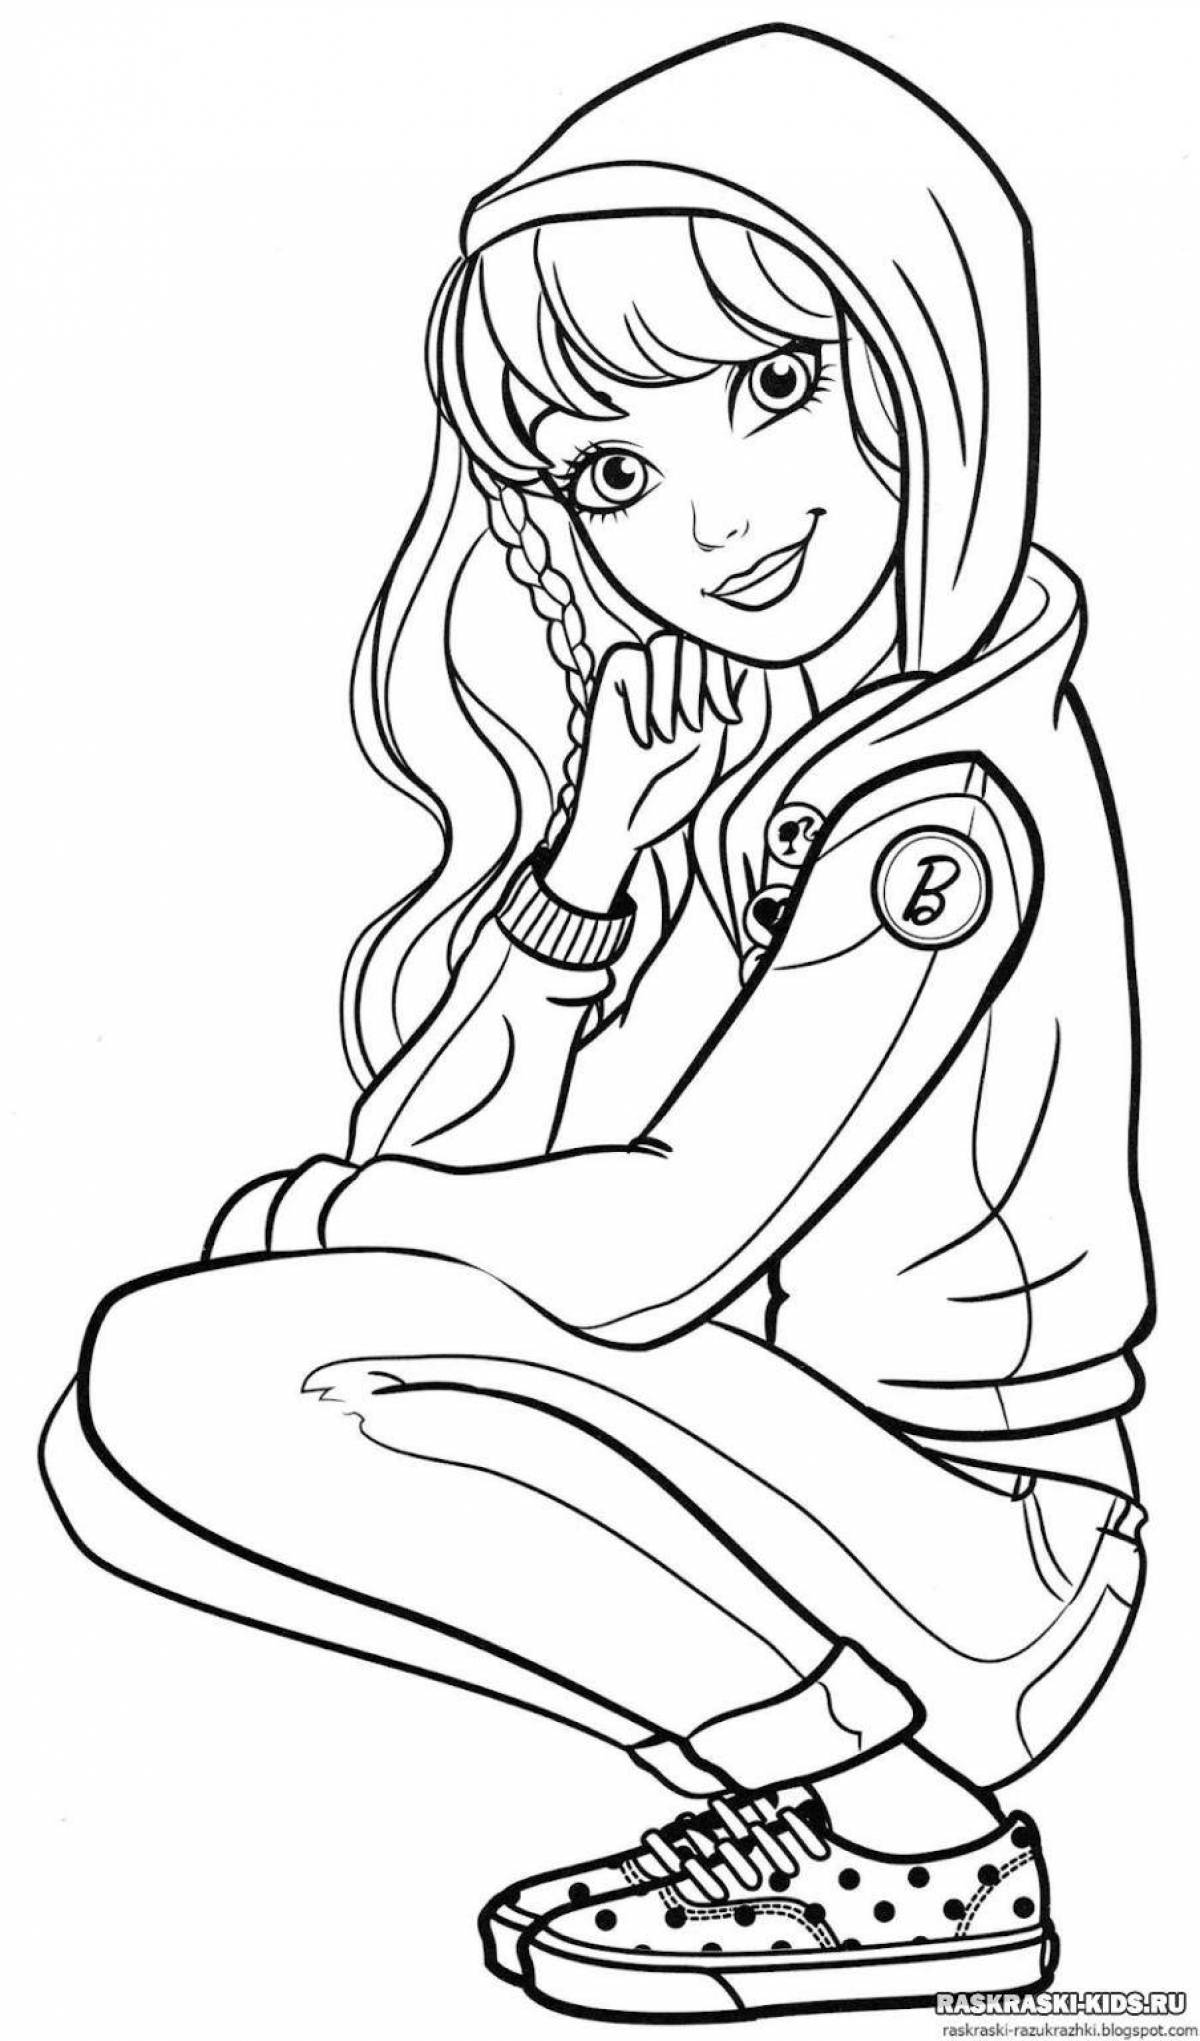 Fun coloring page 12 for girls